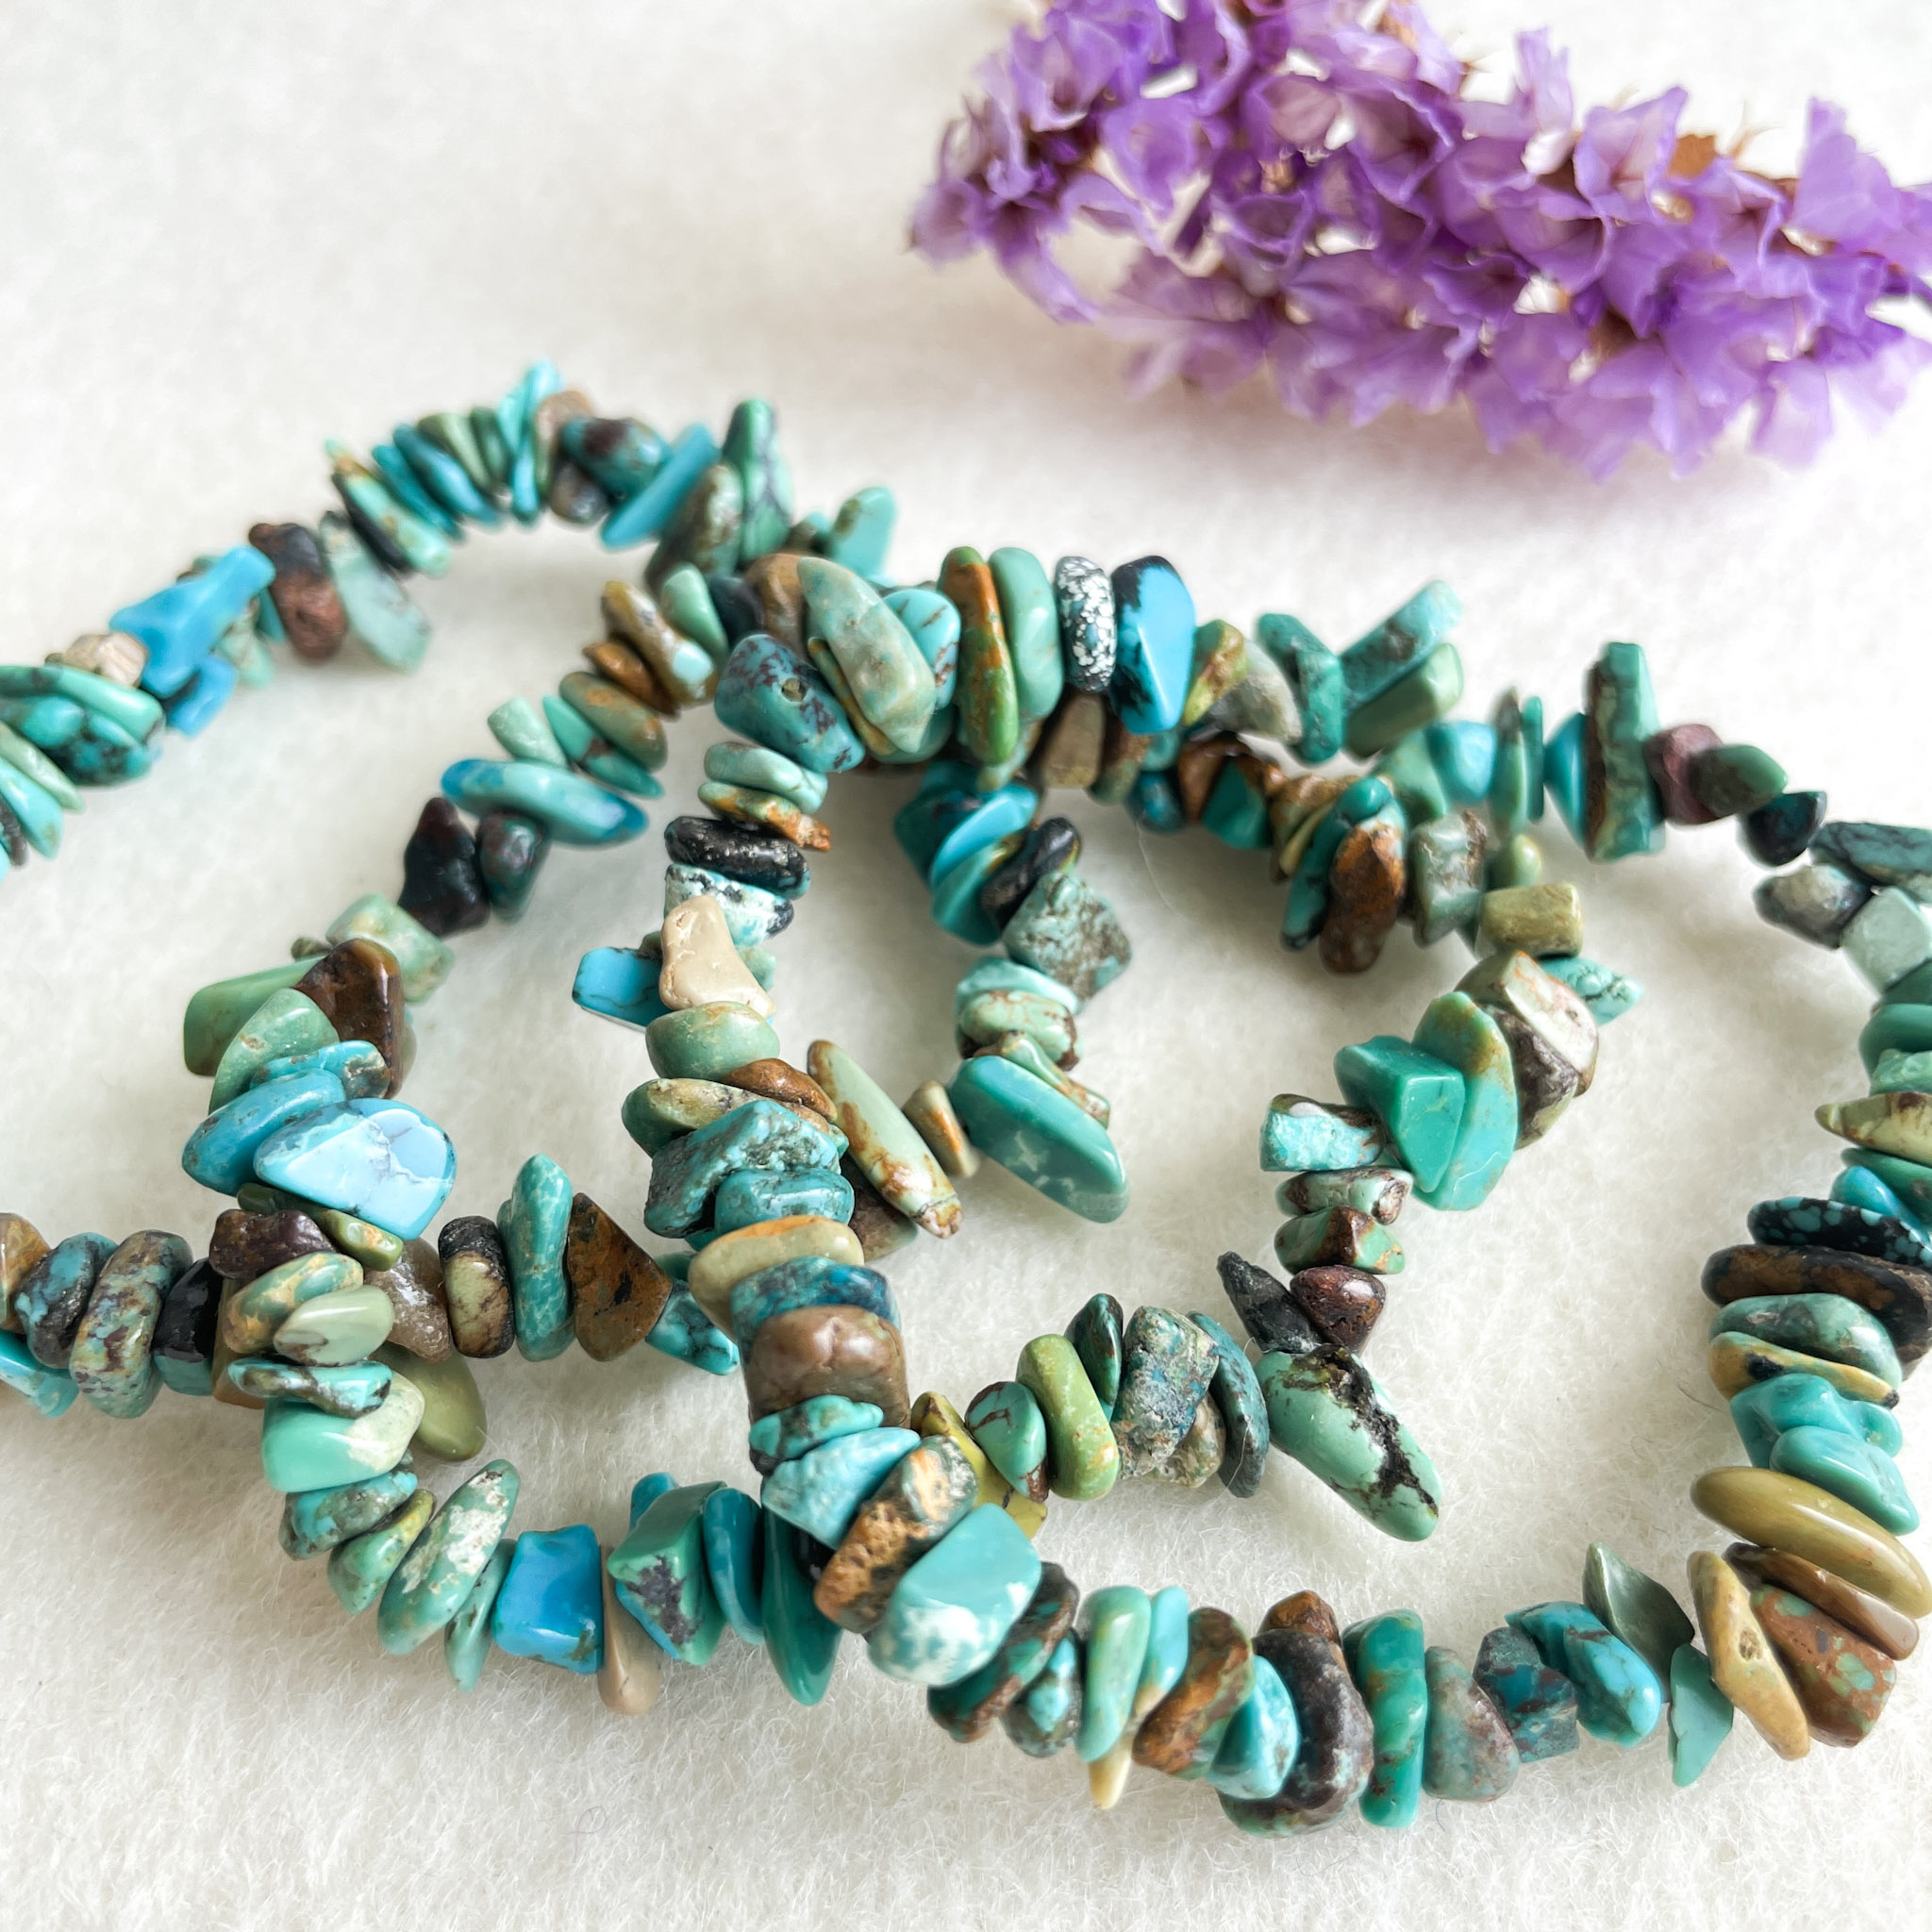 A necklace made of various shades of turquoise and brown gemstone beads arranged in a circle on a white background, with a sprig of purple flowers in the upper right corner.